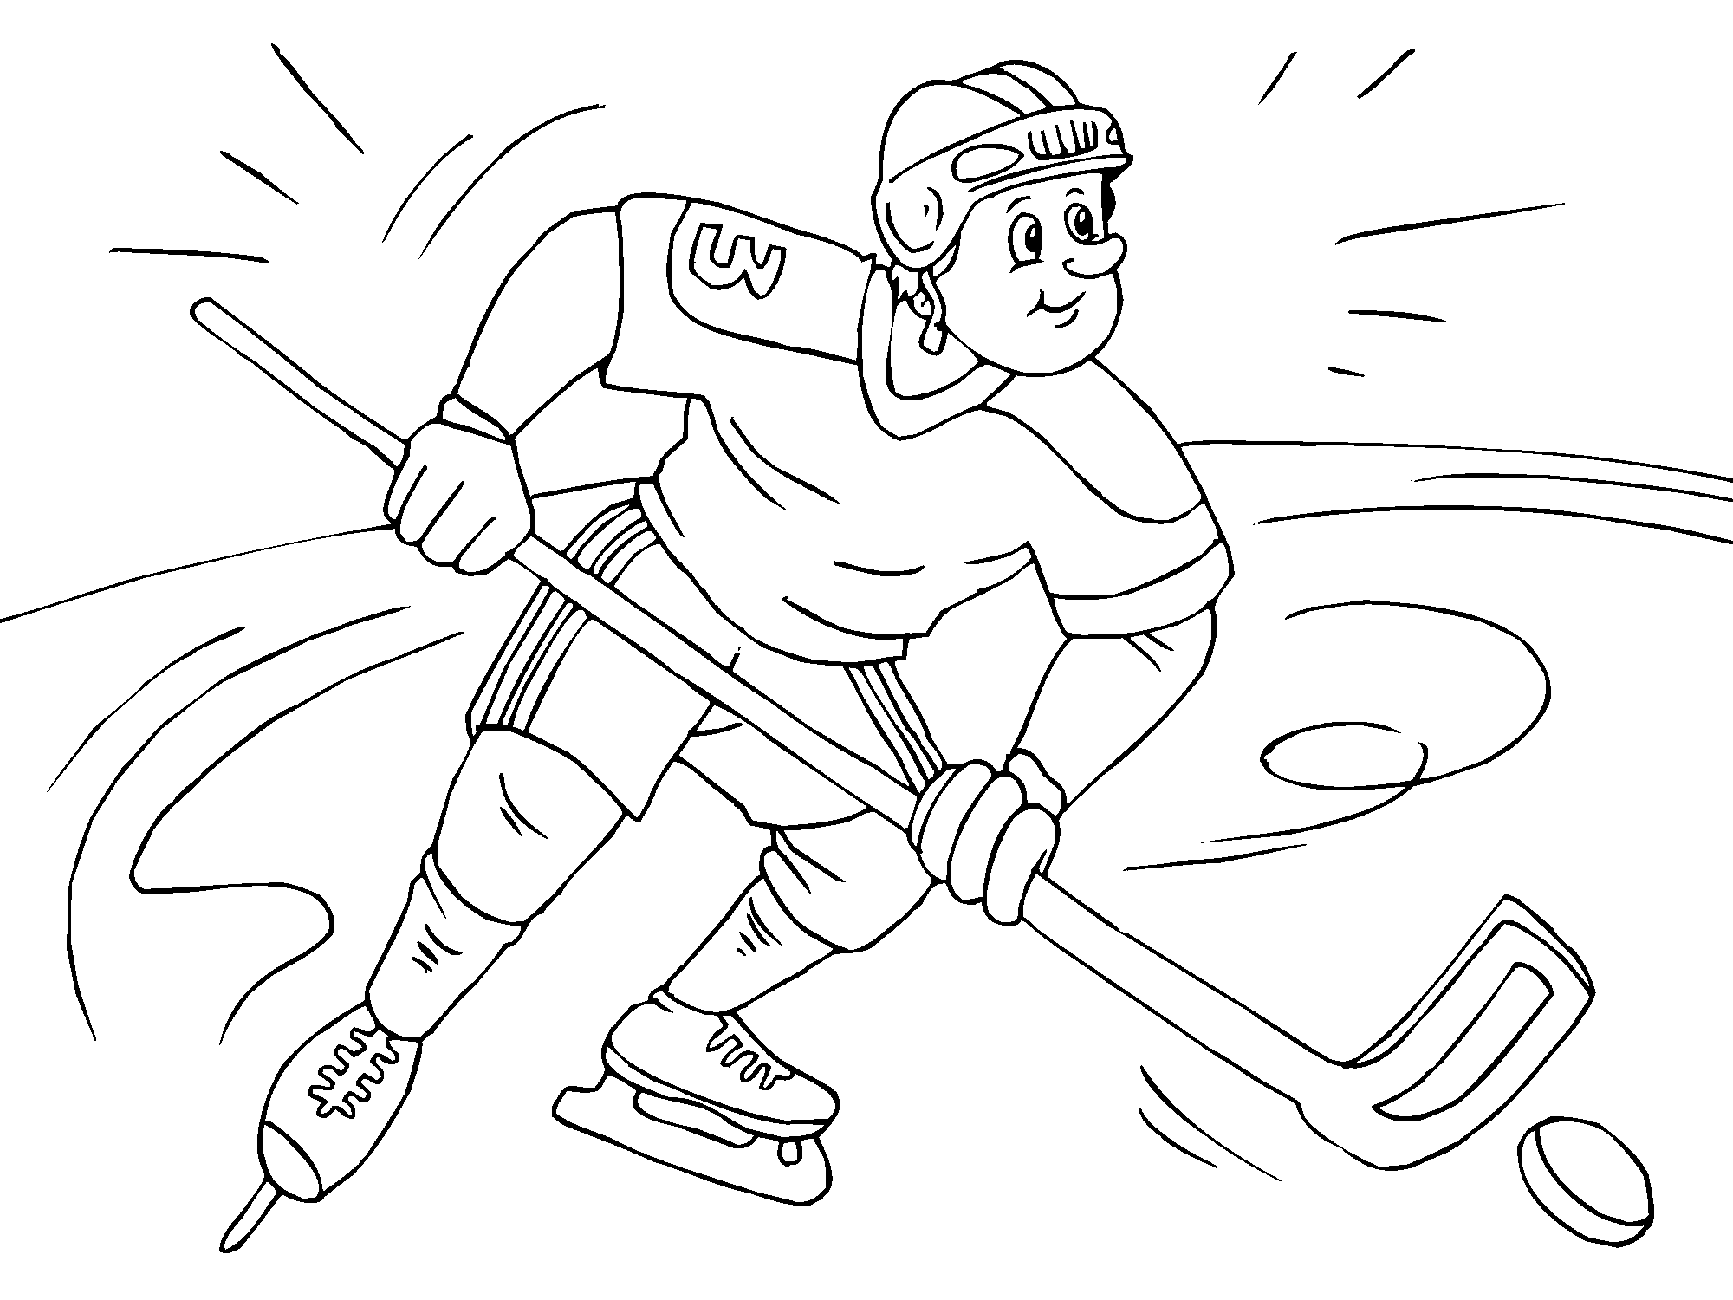 Printable Hockey Coloring Pages - Printable Templates